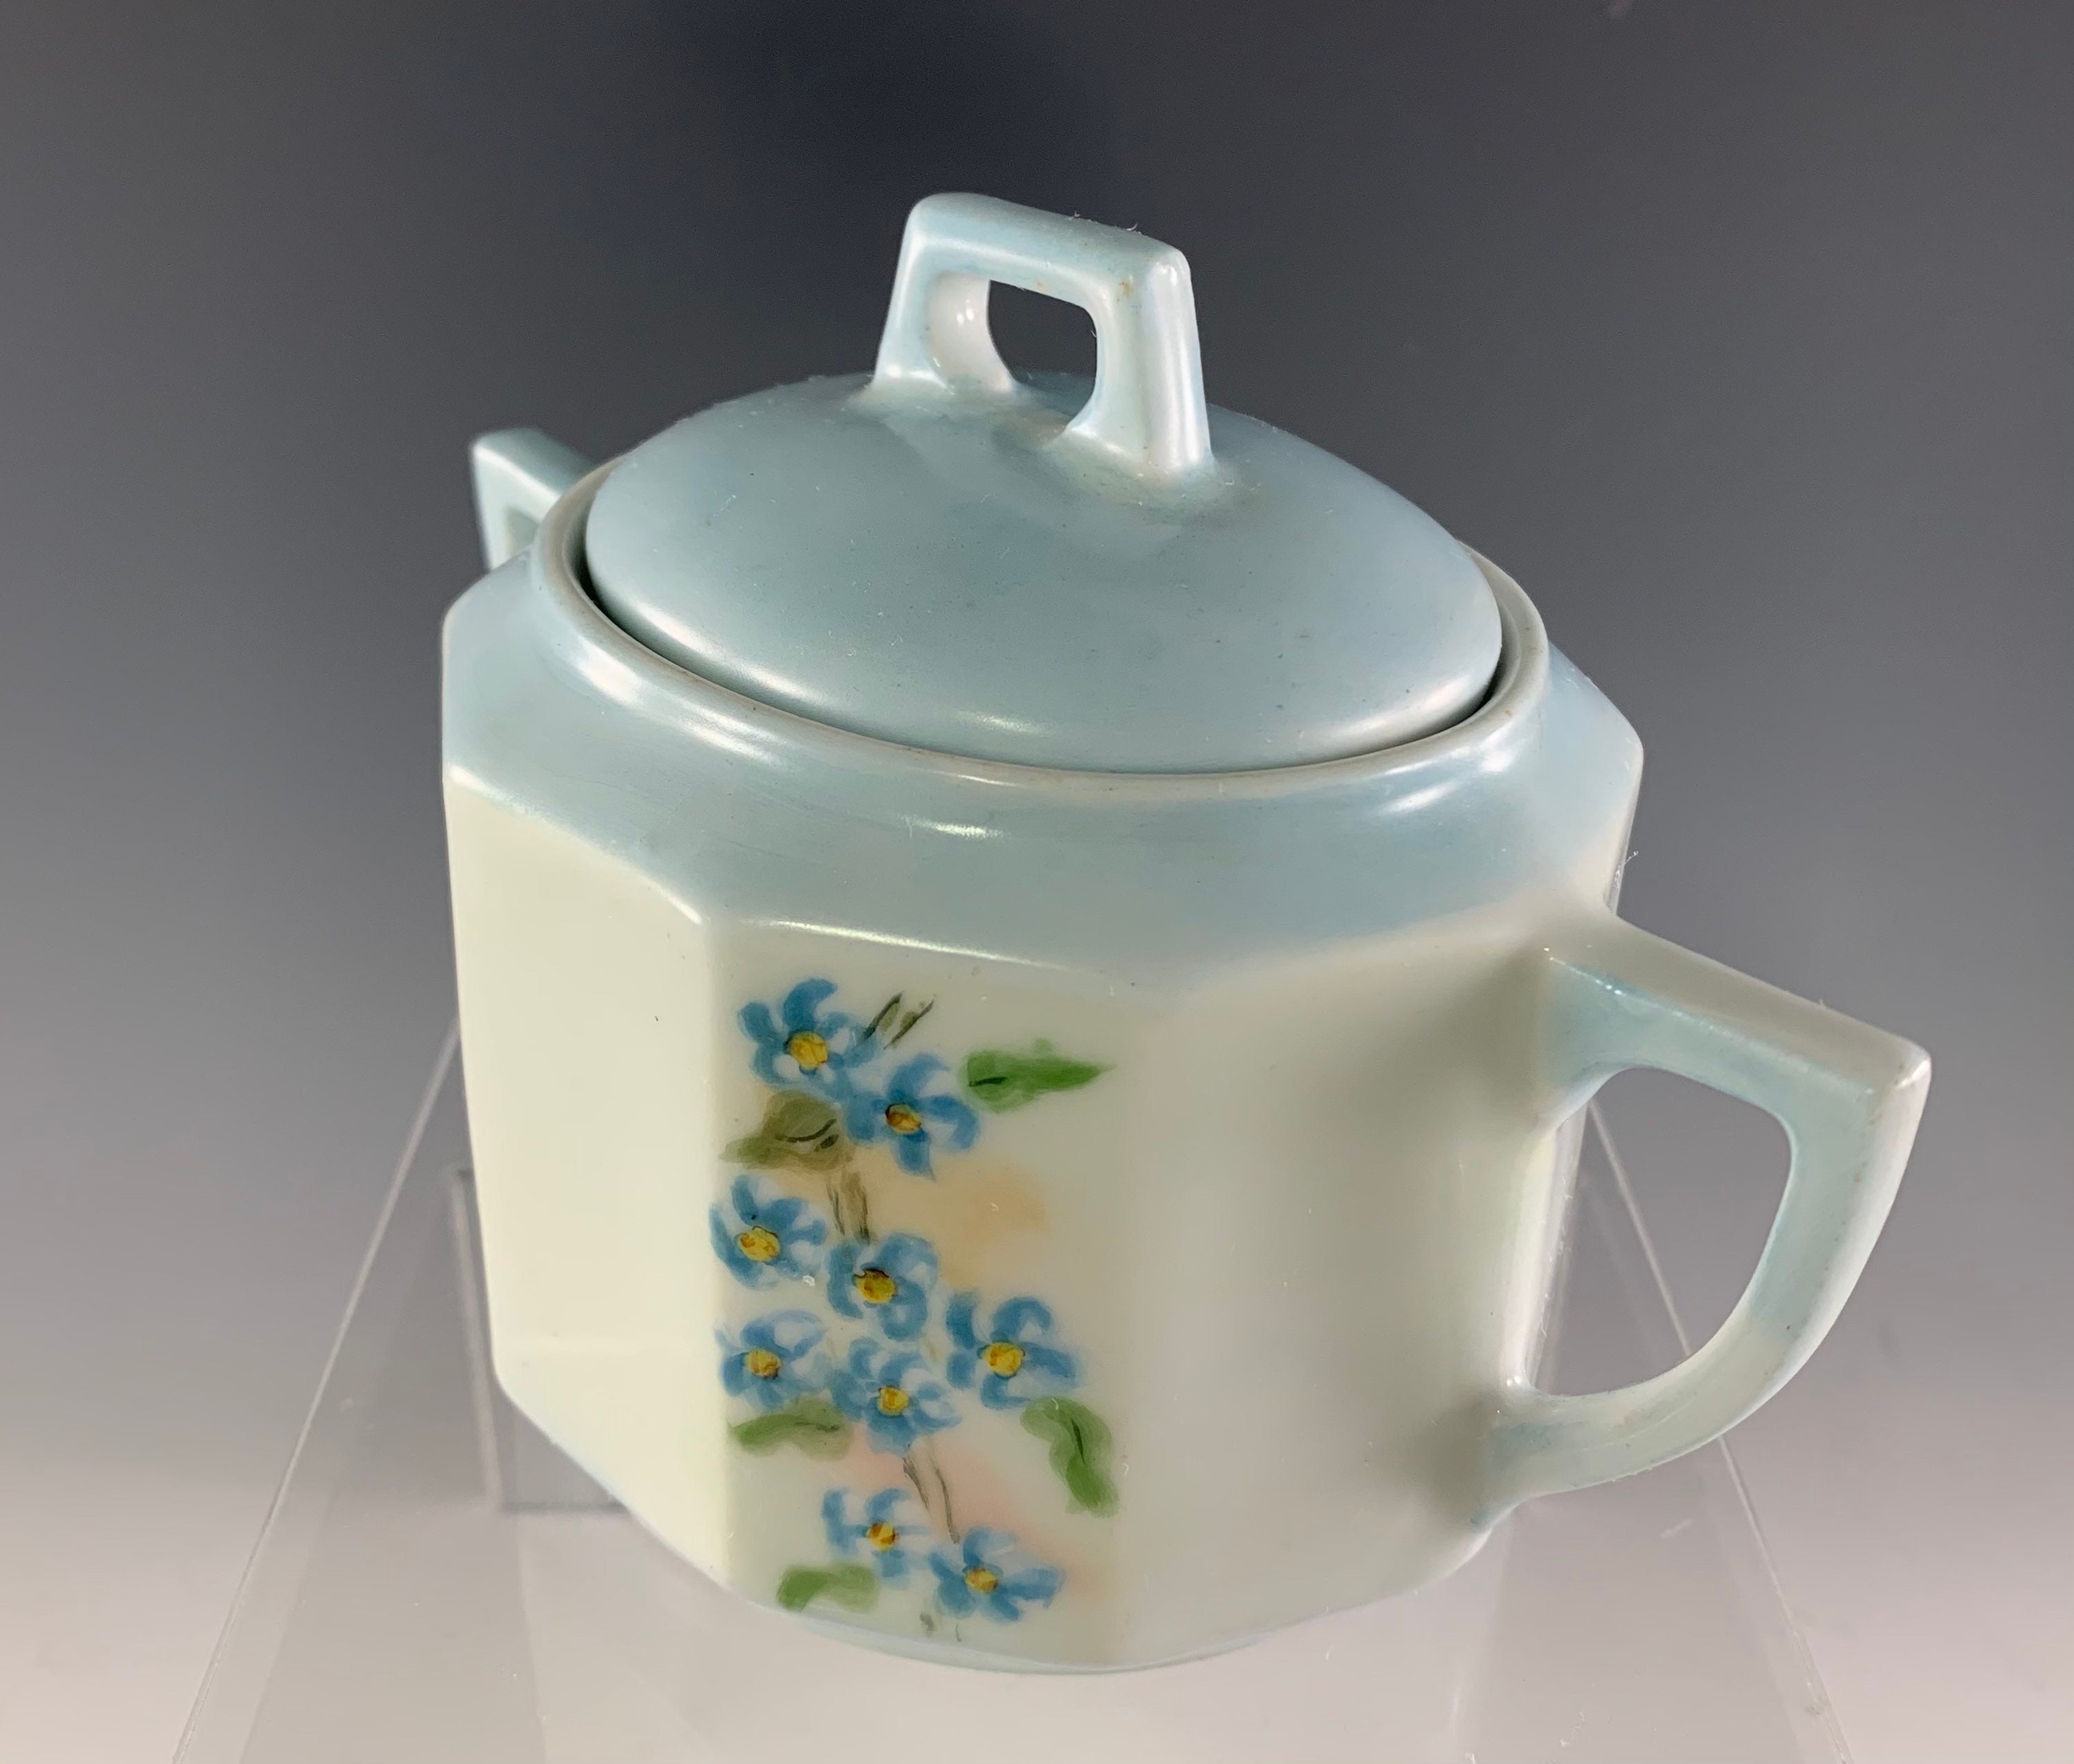 CT Altwasser Silesia Hand Painted Covered Sugar Bowl with Forget-Me-Nots c1920s